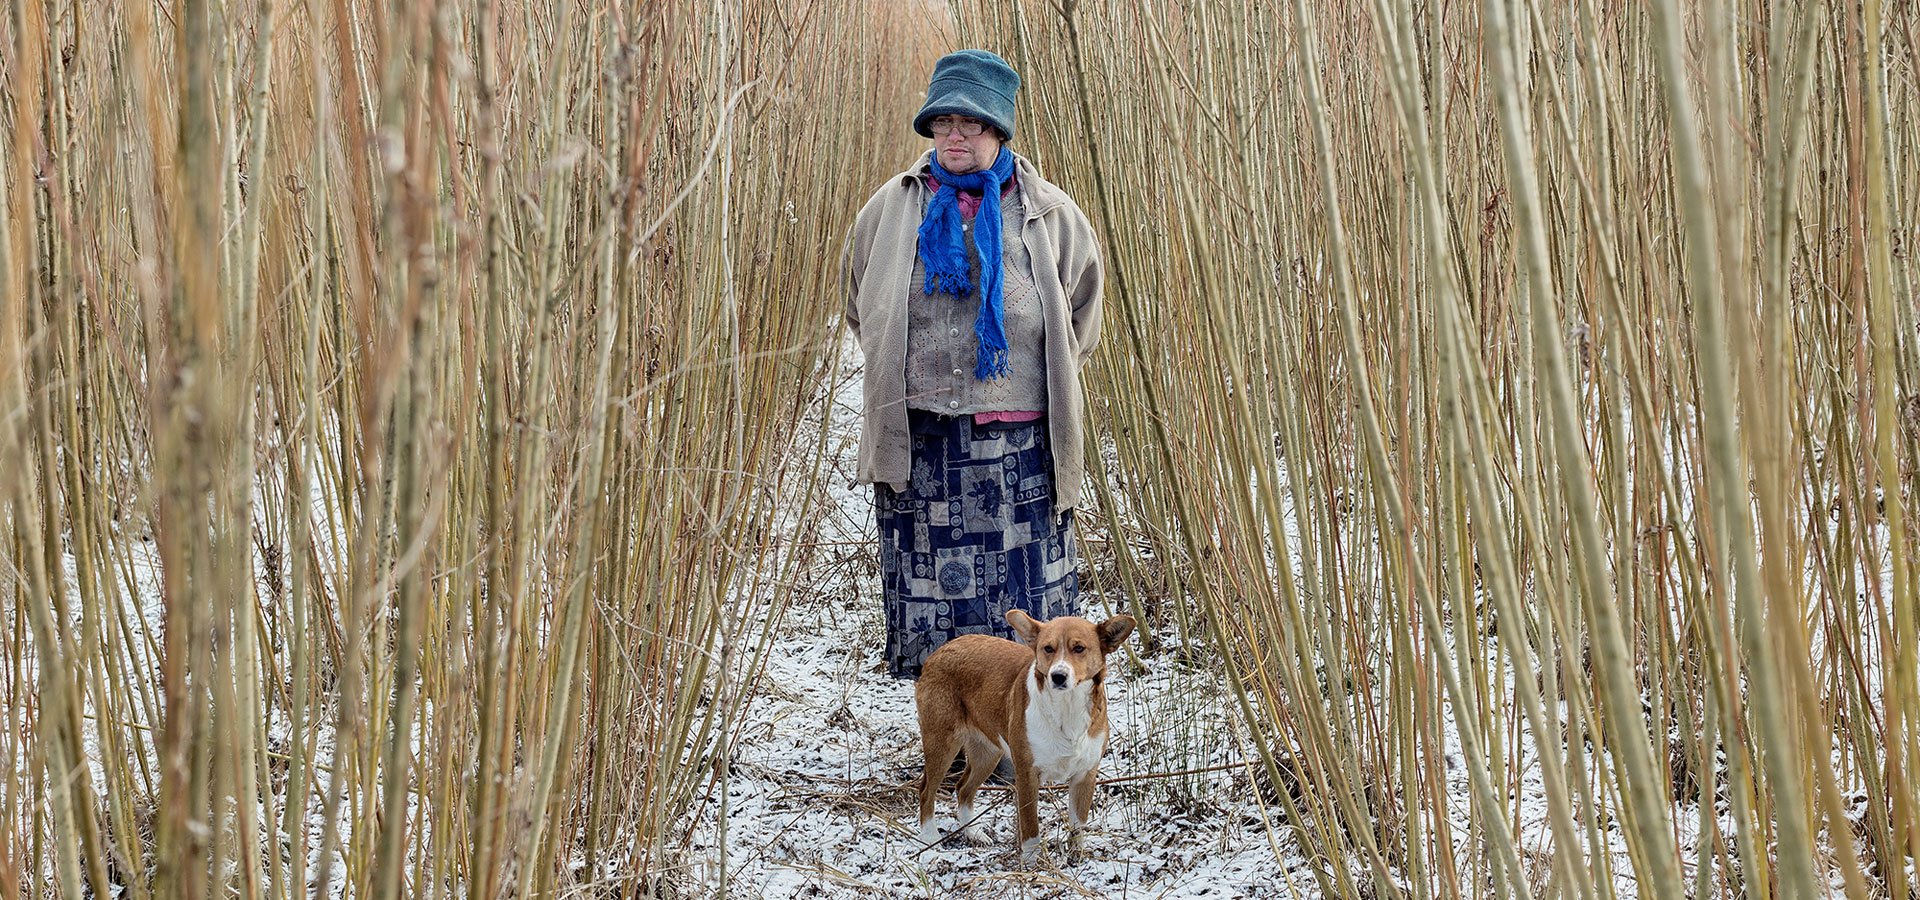 In rural Poland, a mother cuts her own path